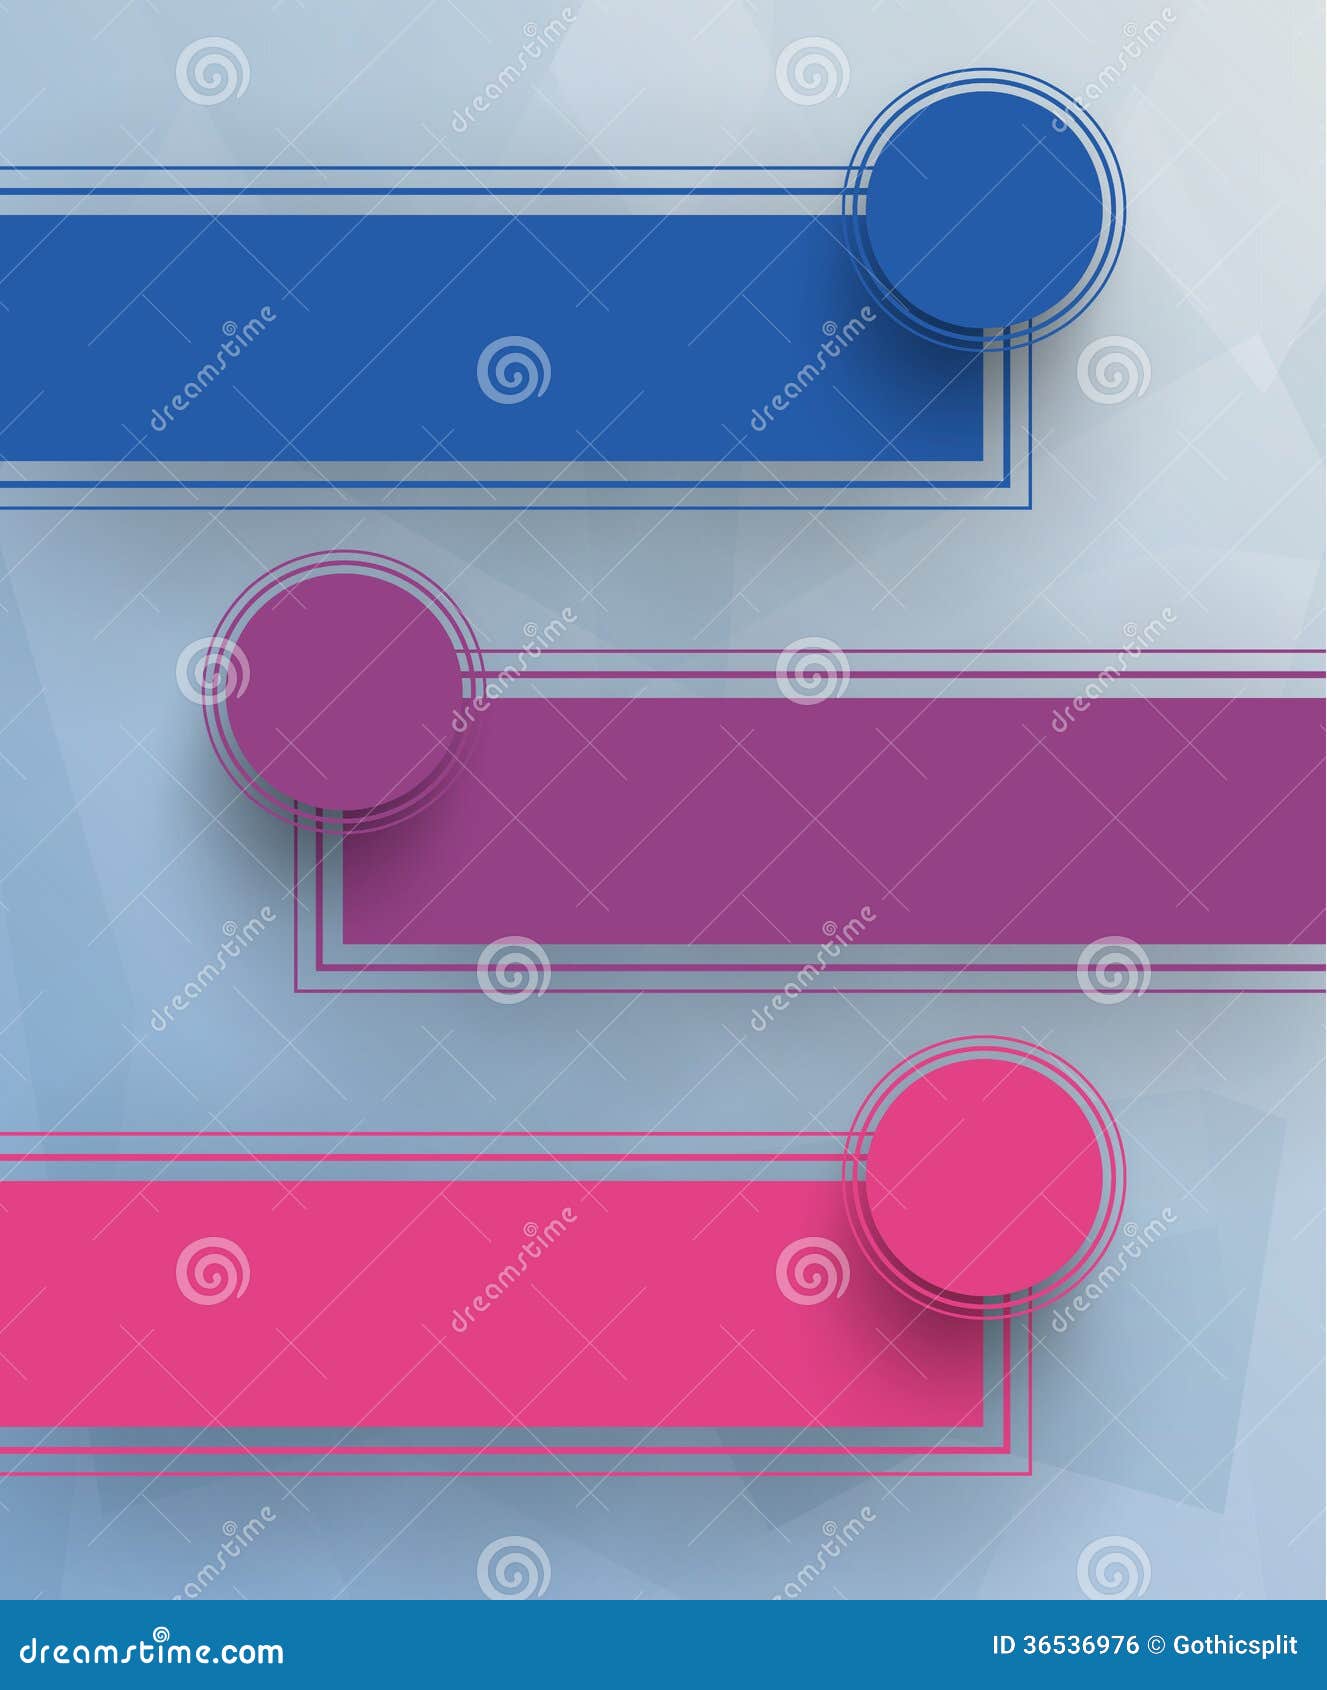 Colorful Labels Template Royalty Free Stock Image - Image: 36536976